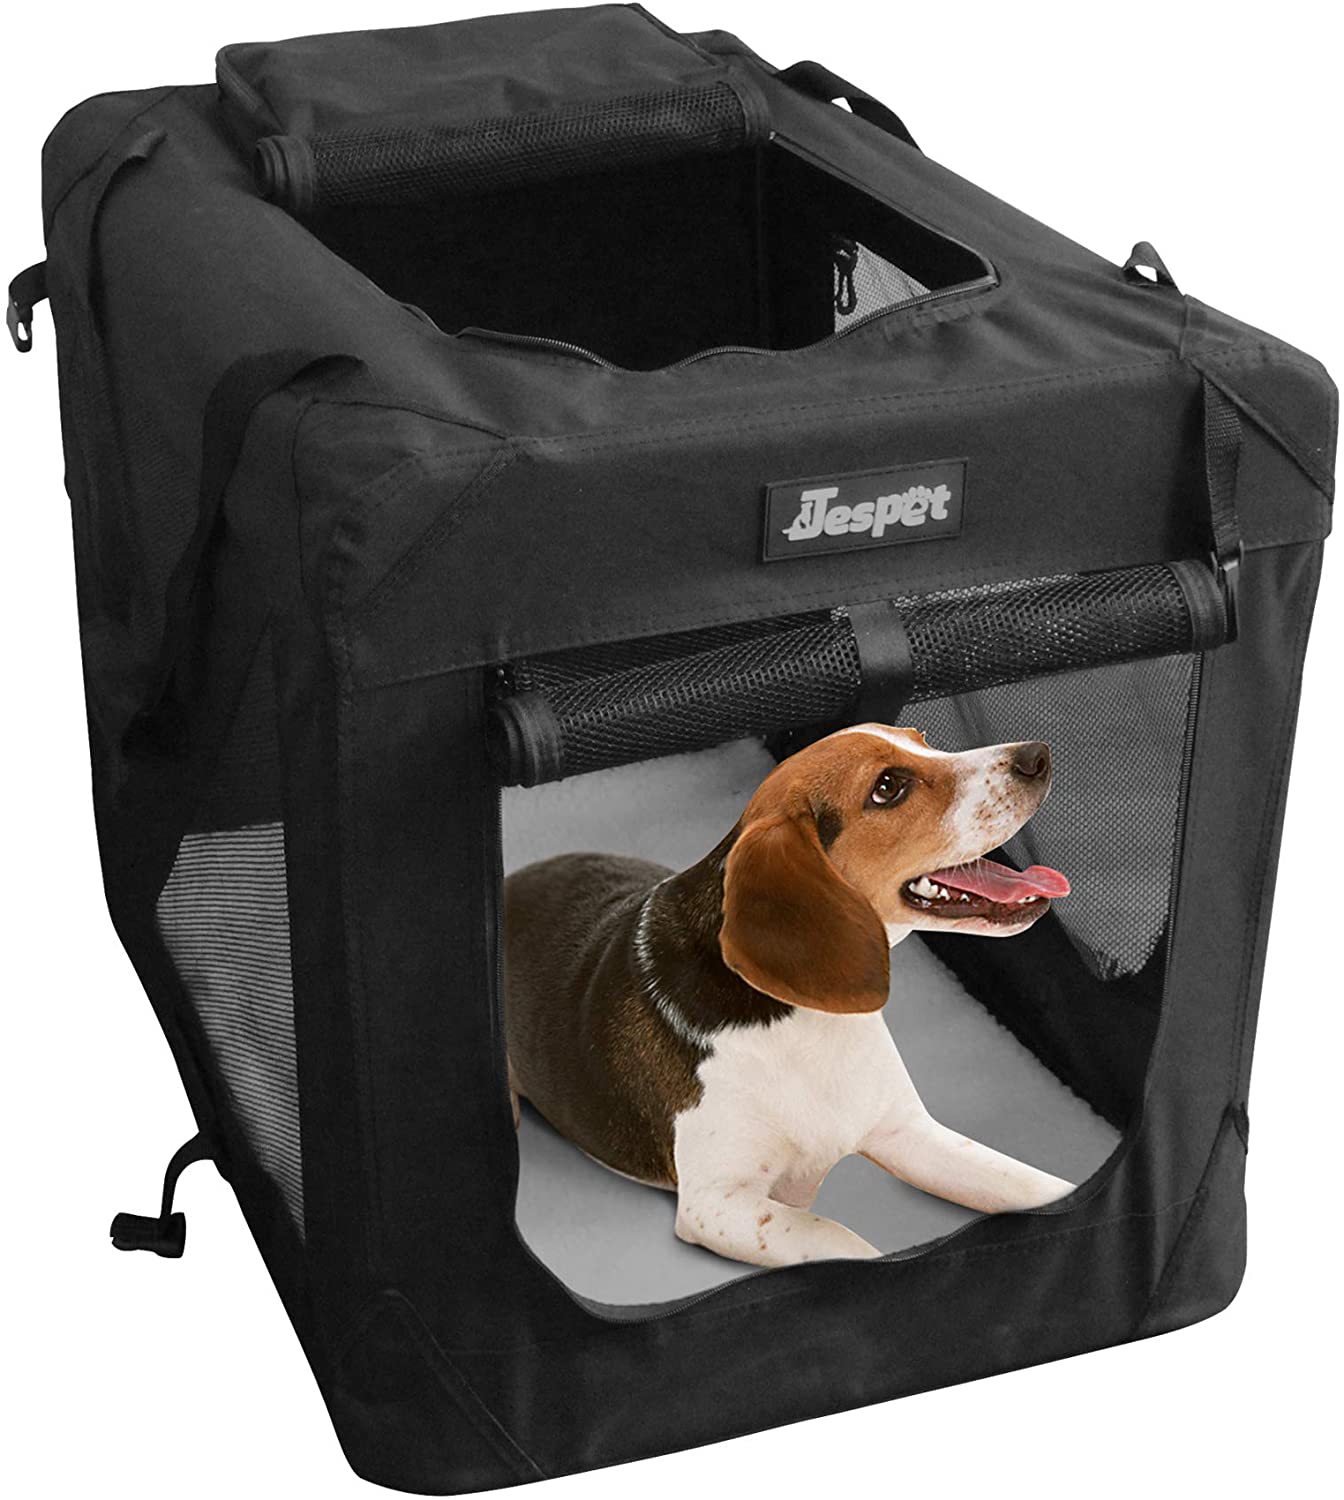 JESPET Soft Pet Crates Kennel 26", 30" & 36", 3 Door Soft Sided Folding Travel Pet Carrier with Straps and Fleece Mat for Dogs, Cats, Rabbits, Indoor/Outdoor Use with Grey, Blue & Beige, Black Animals & Pet Supplies > Pet Supplies > Dog Supplies > Dog Kennels & Runs JESPET Black 30"L x 21"W x 23"H 